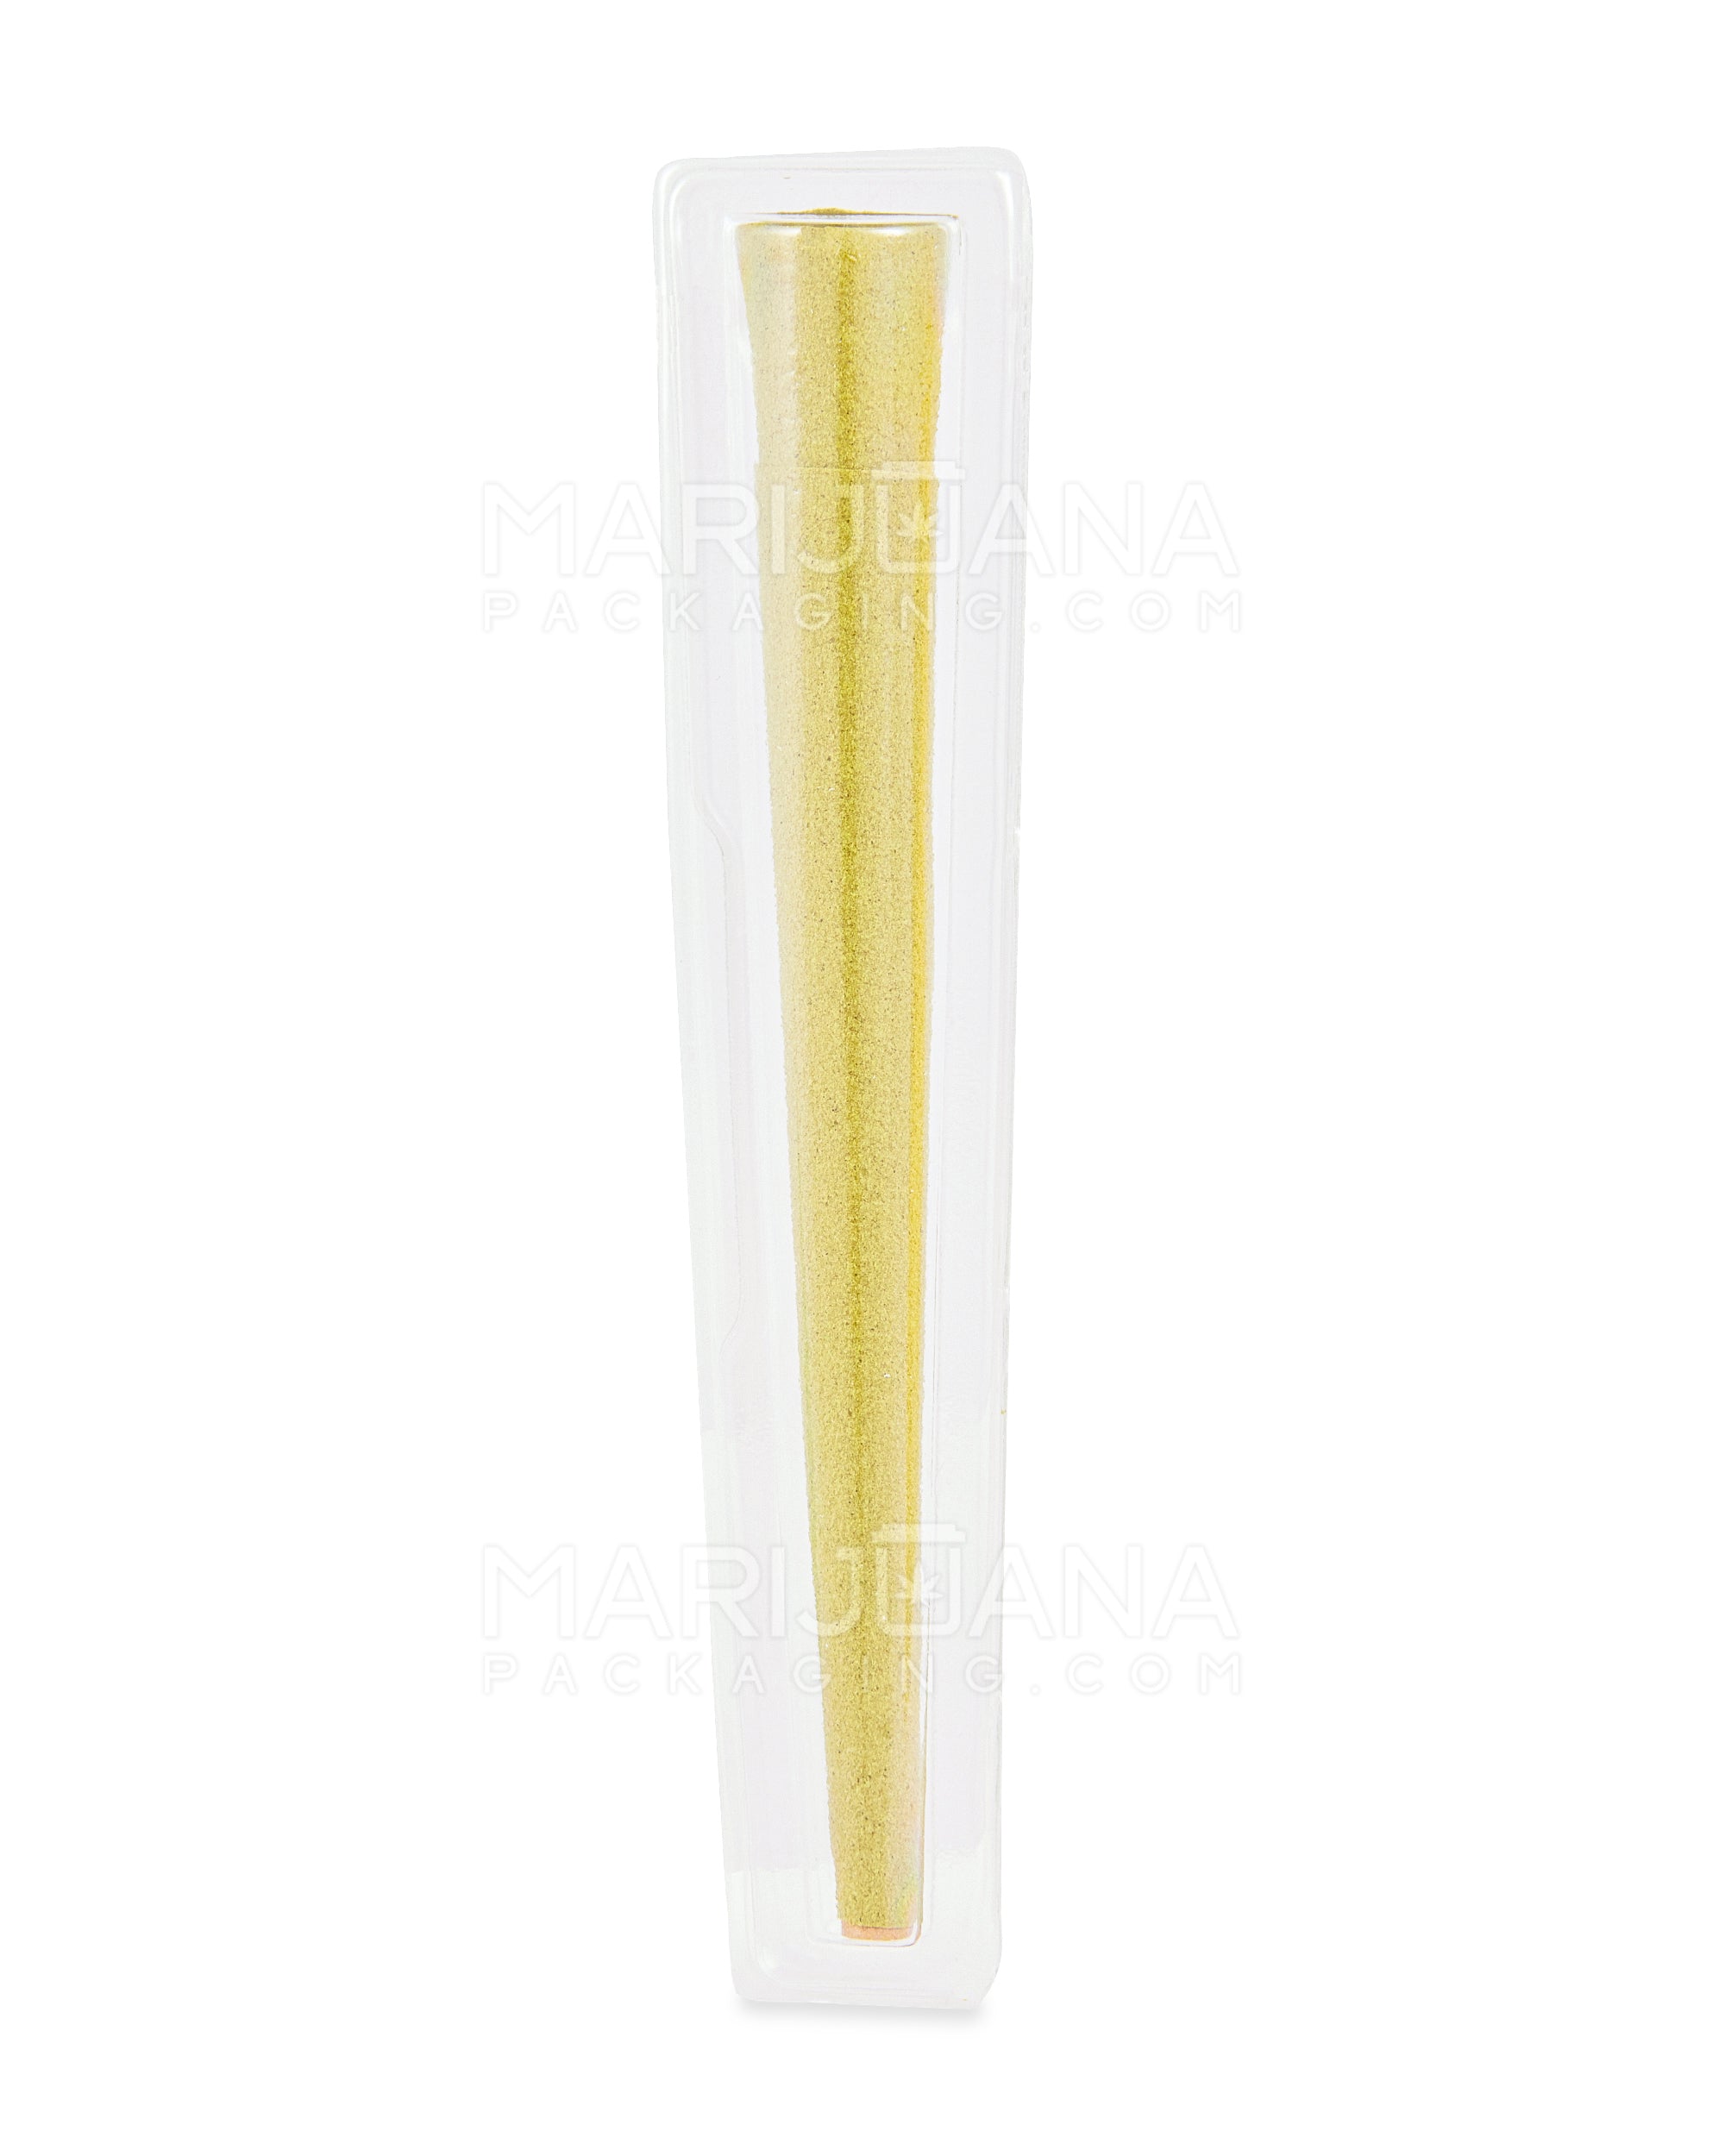 KUSH | 'Retail Display' Terpene Infused Herbal Conical Wraps | 160mm - Mimosa - 12 Count - 5